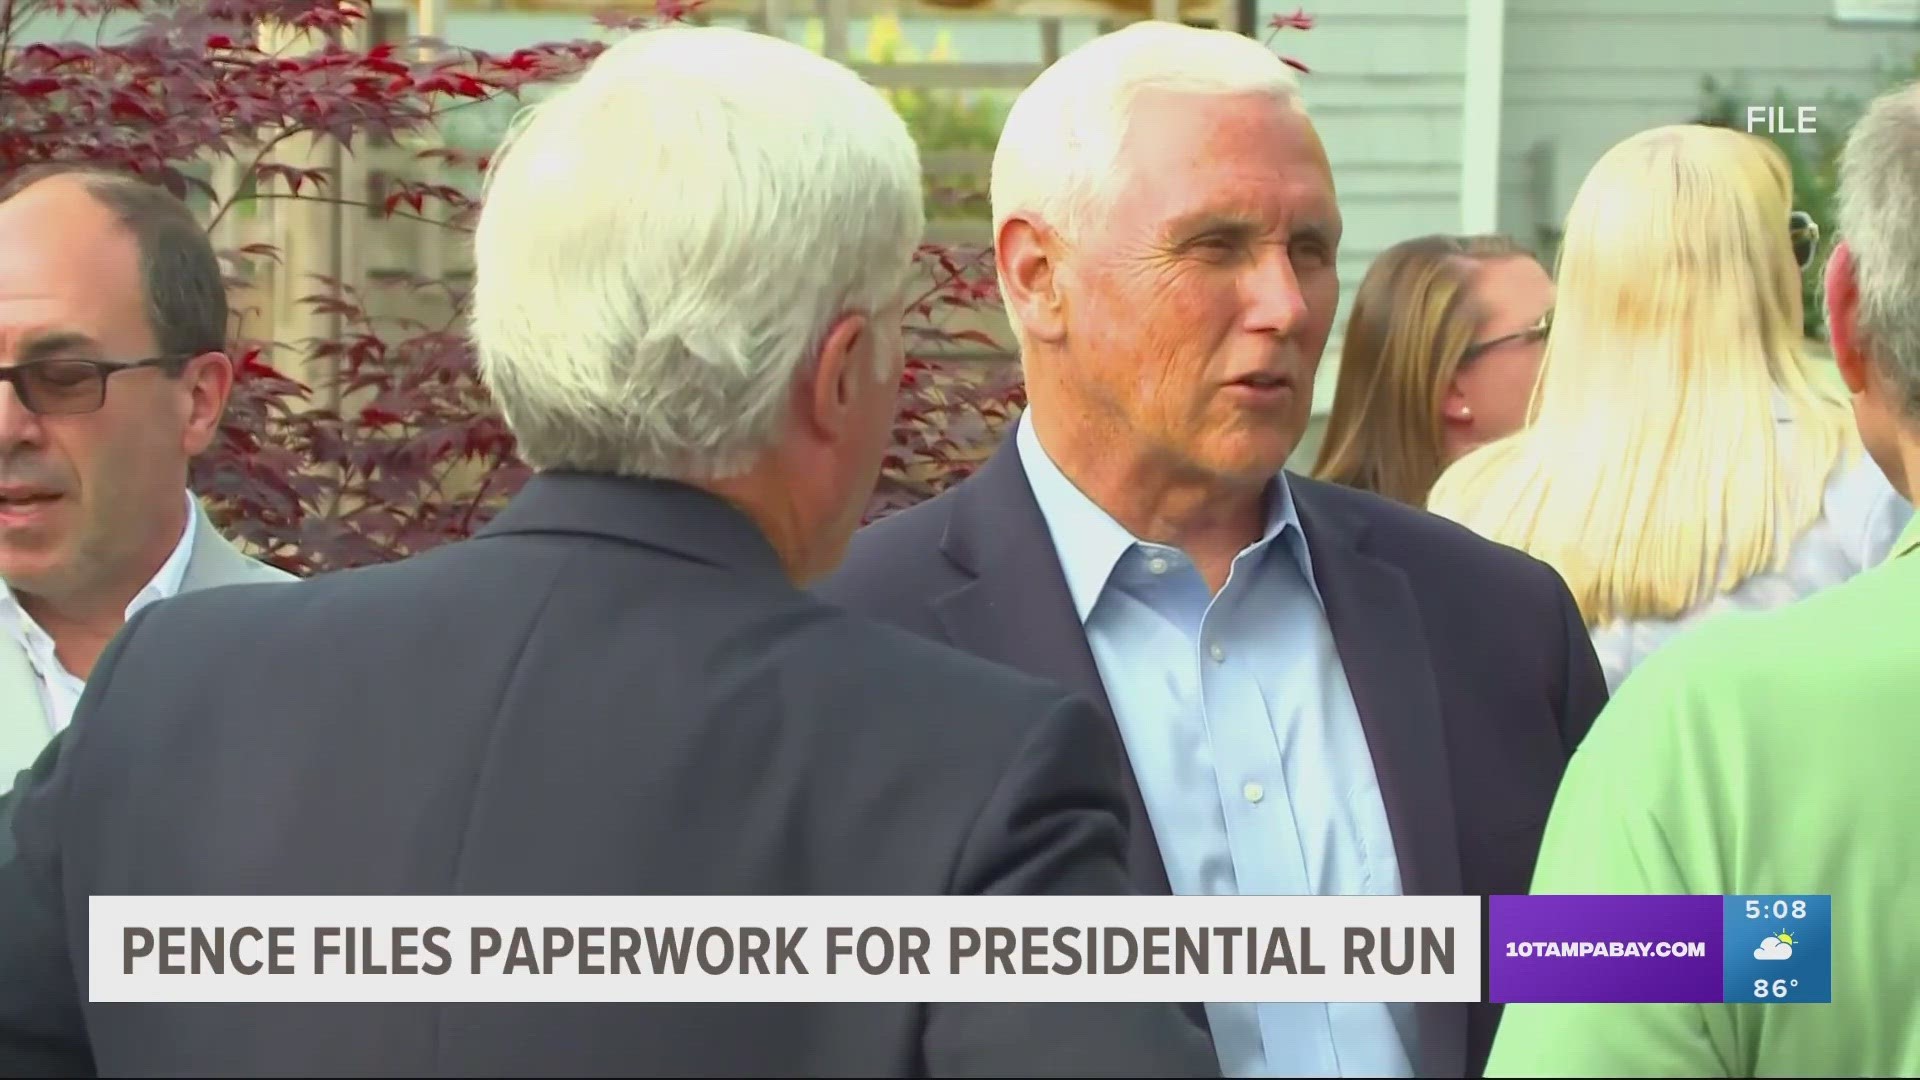 Pence, who describes himself as “a Christian, a conservative and a Republican, in that order,” filed paperwork Monday declaring his campaign.